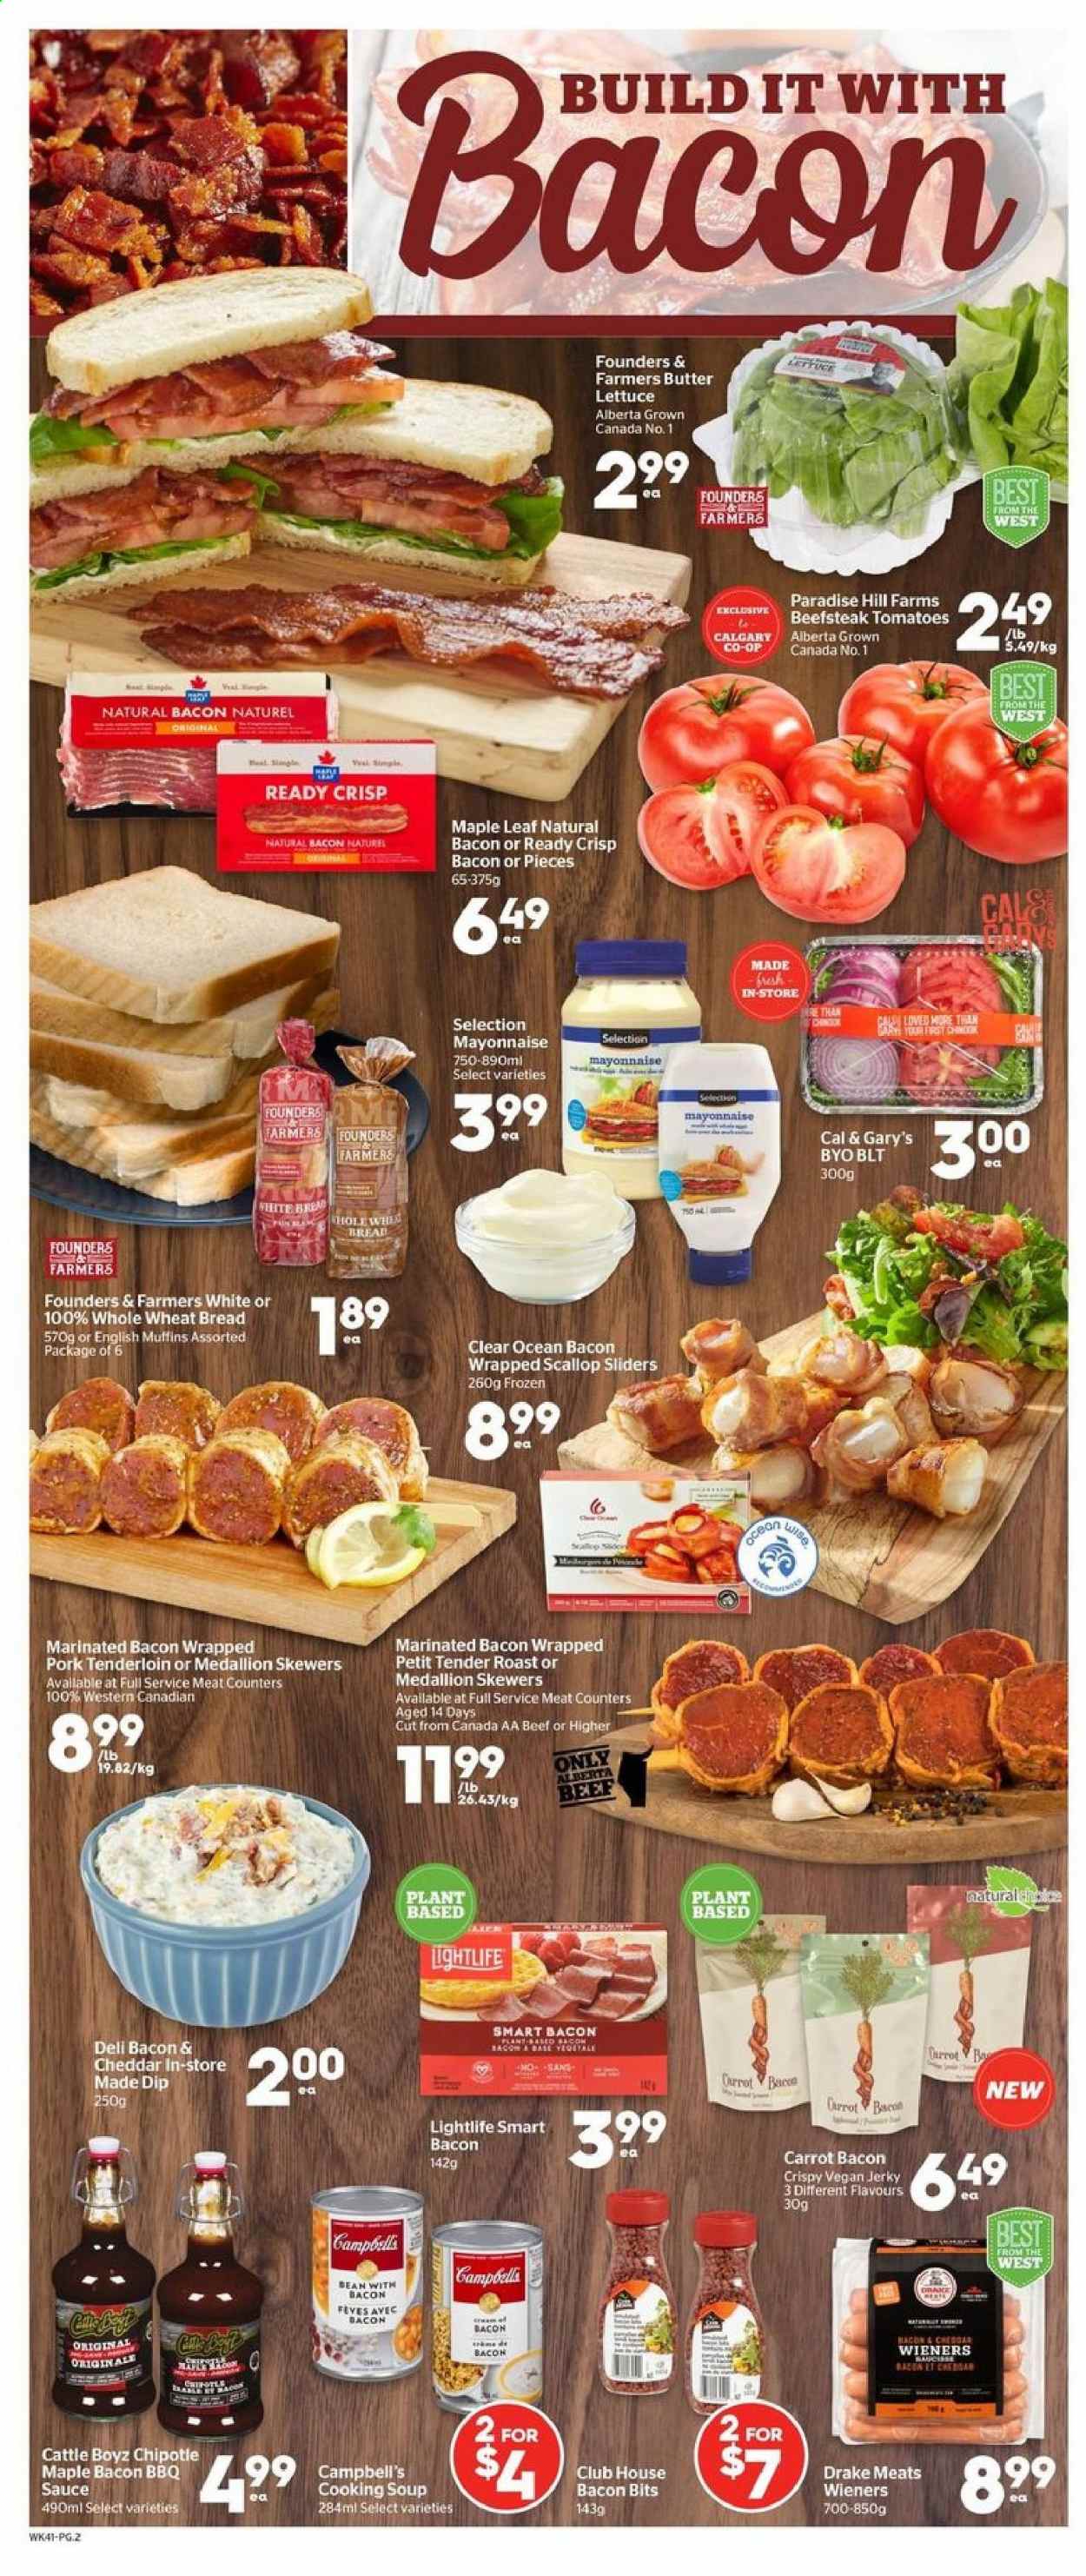 thumbnail - Calgary Co-op Flyer - August 12, 2021 - August 18, 2021 - Sales products - english muffins, wheat bread, butter lettuce, tomatoes, lettuce, scallops, Campbell's, soup, sauce, jerky, cheese, mayonnaise, dip, bacon bits, BBQ sauce, pork meat, pork tenderloin. Page 2.